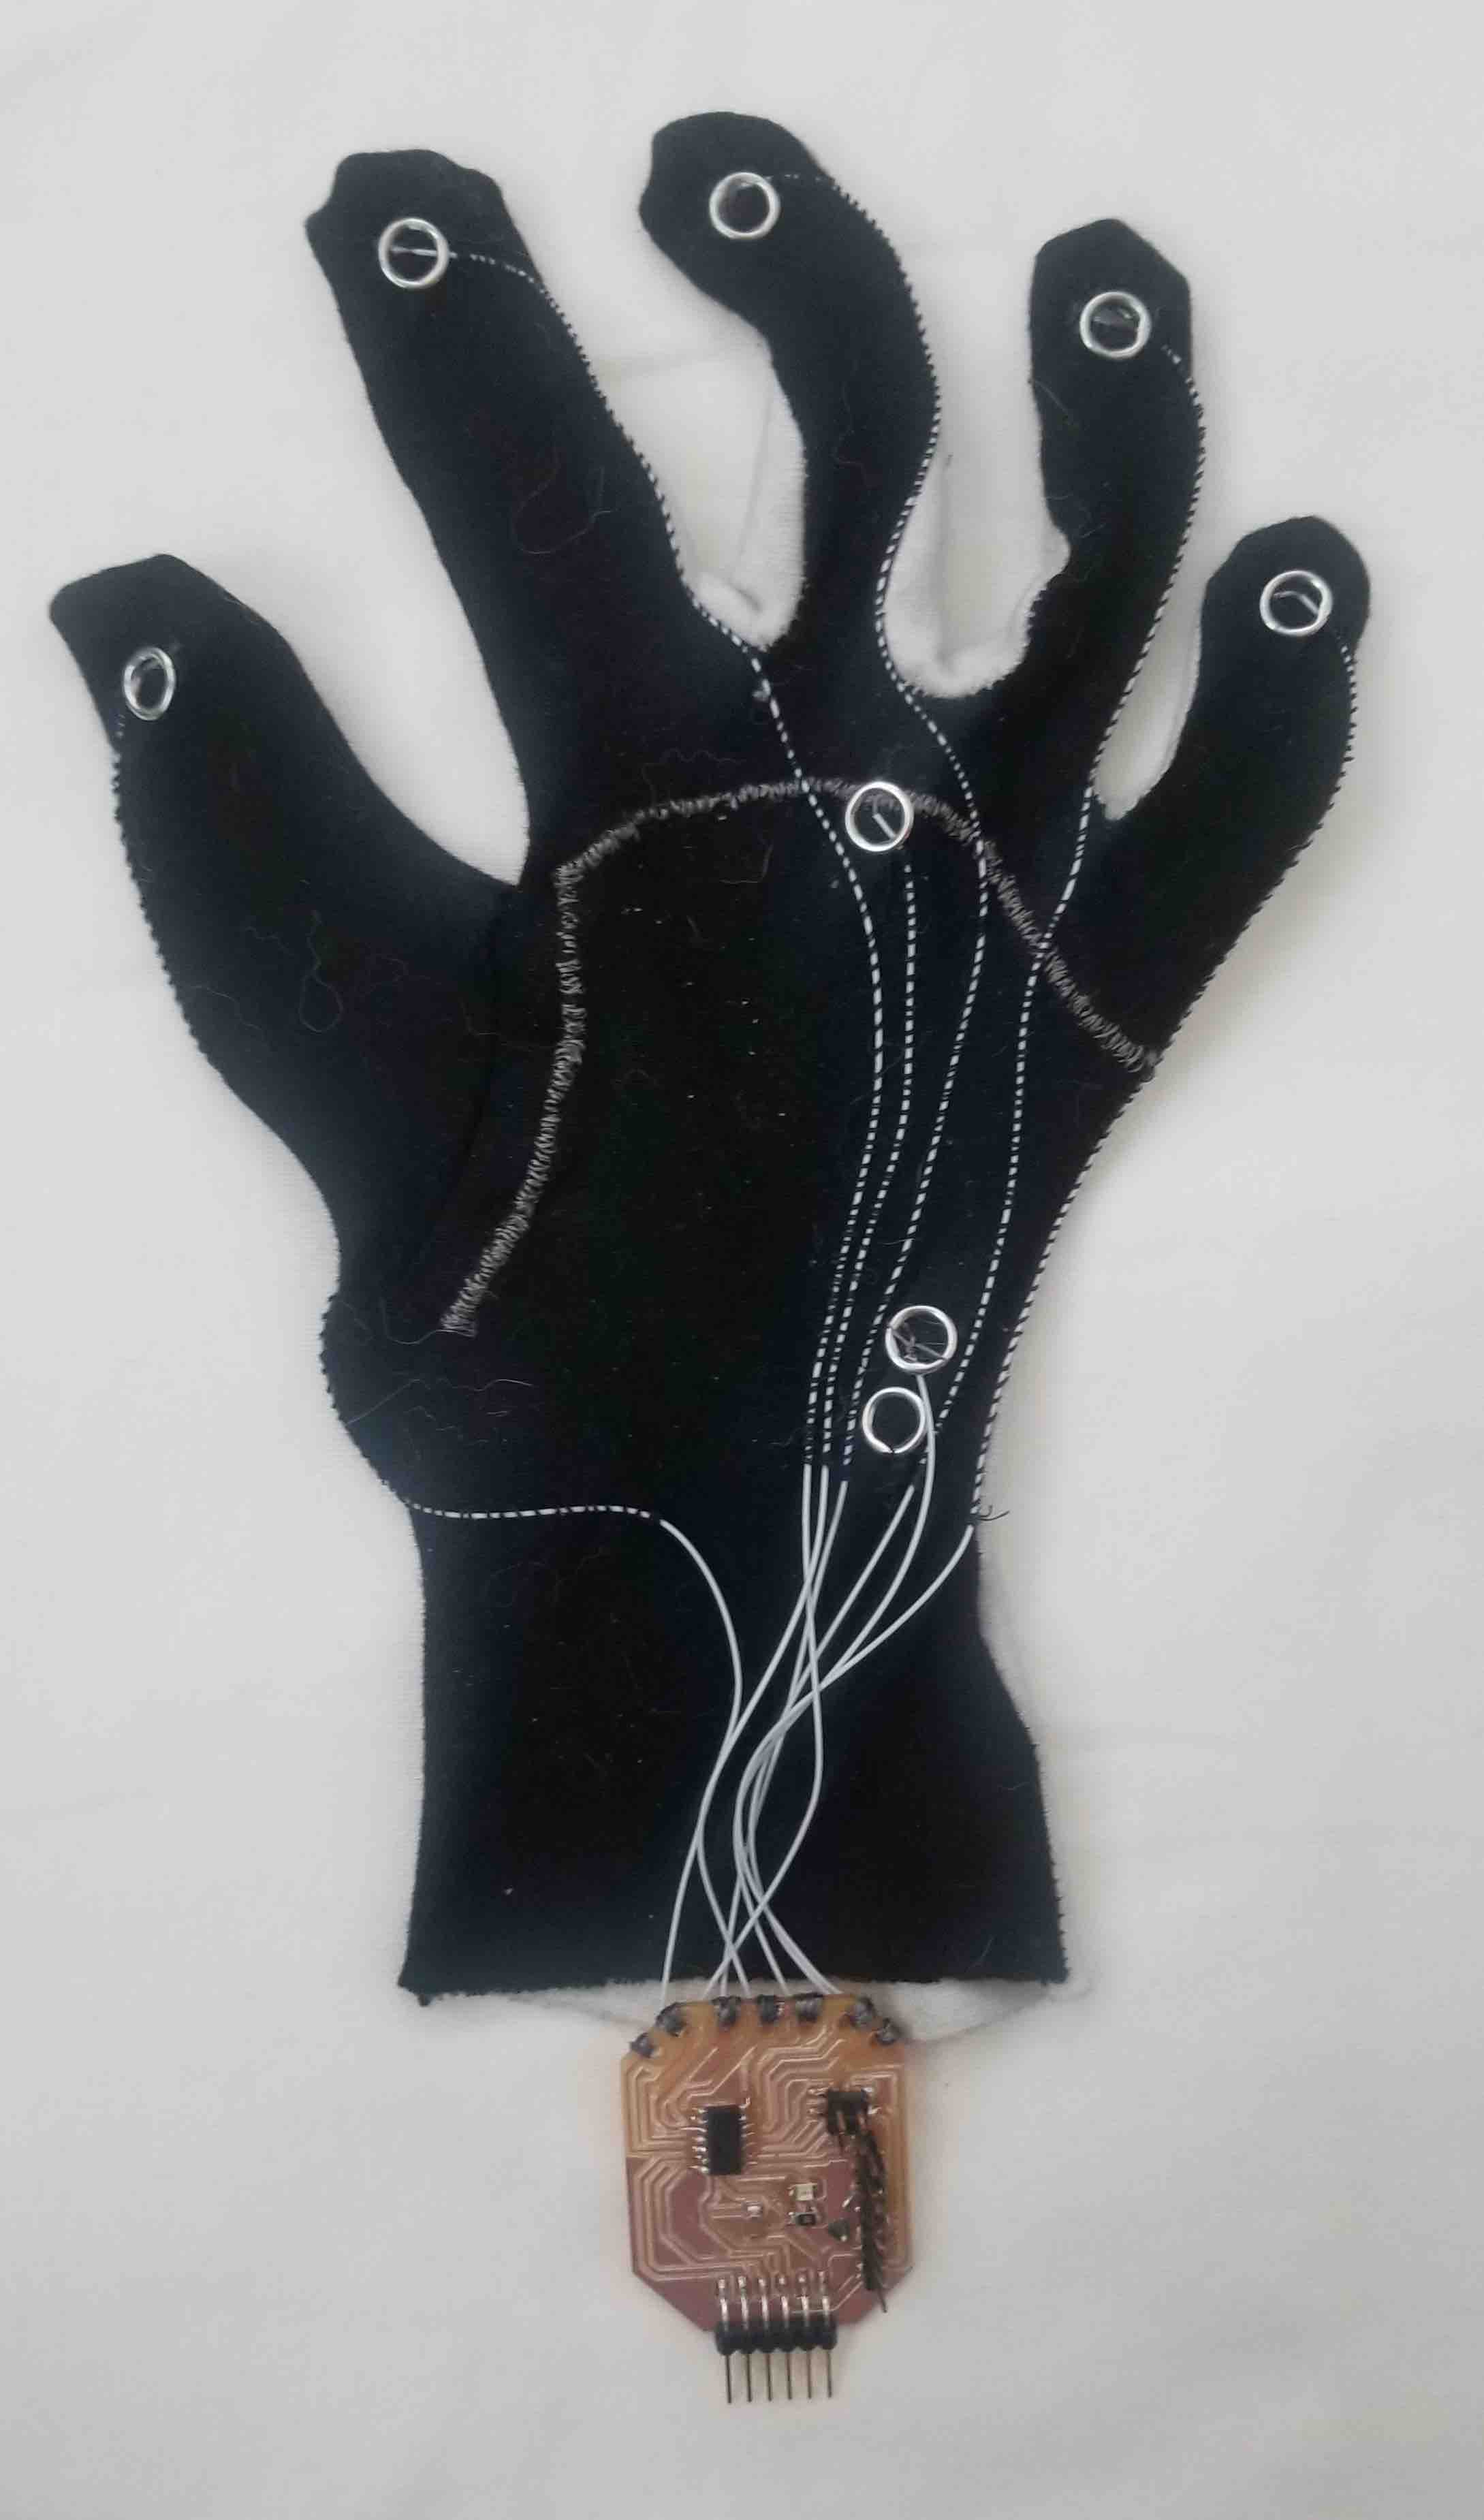 The final glove and board connected.